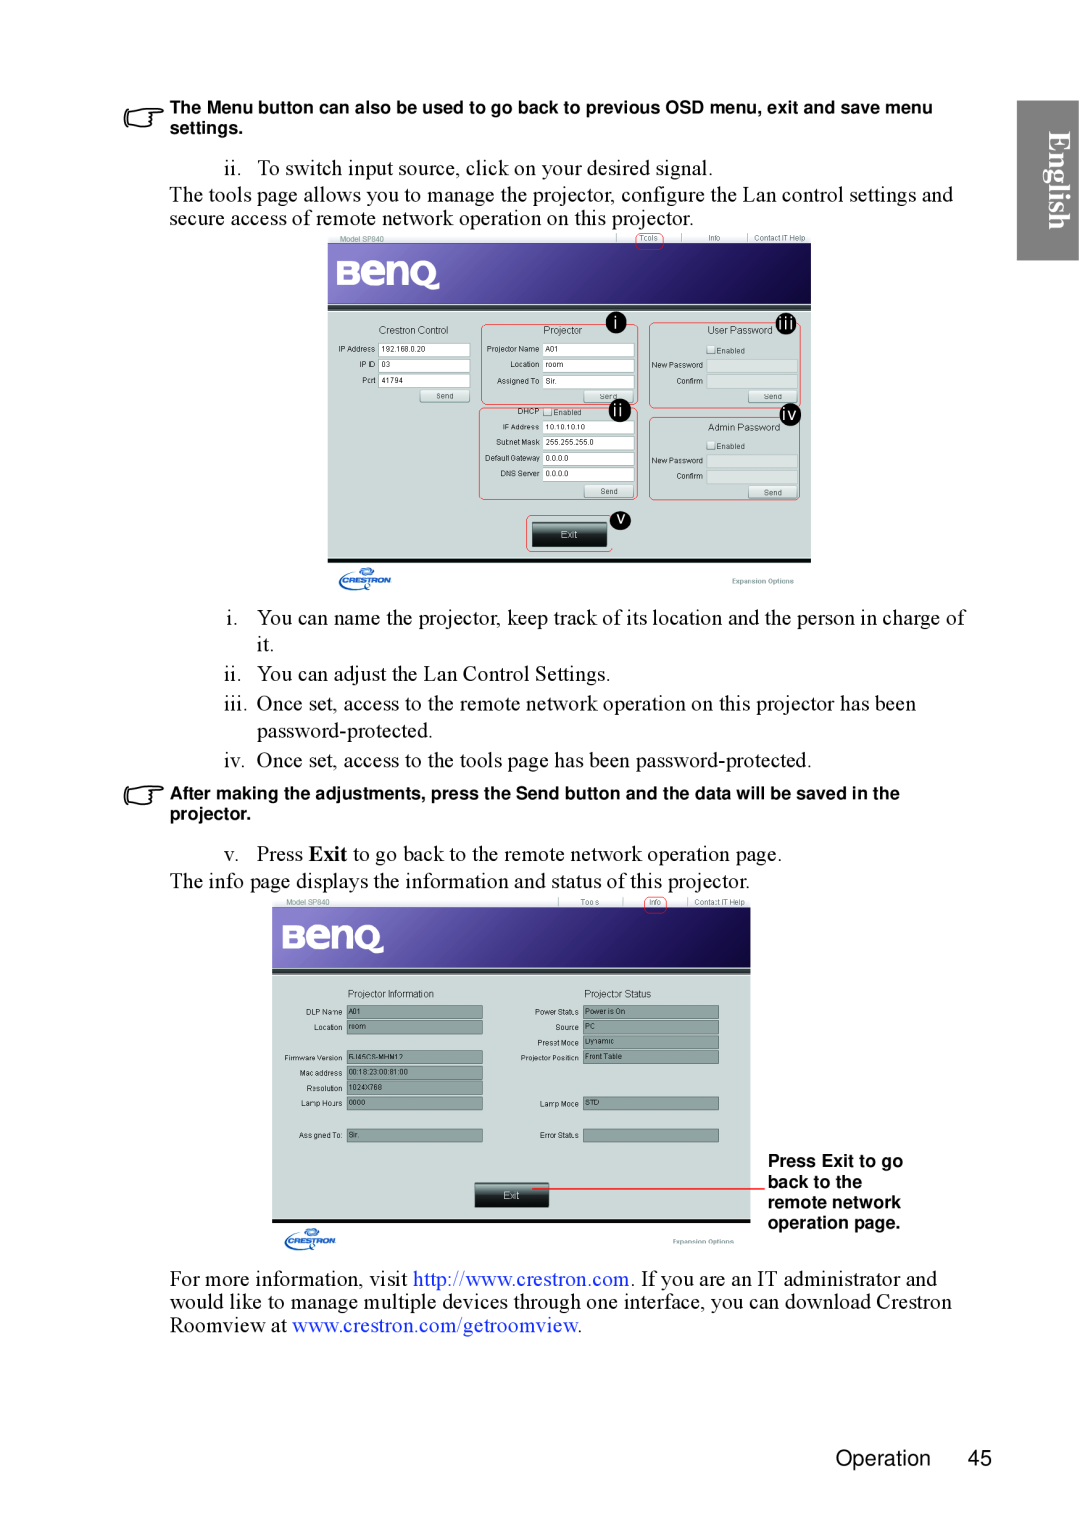 BenQ SP840 user manual English, ii. To switch input source, click on your desired signal 